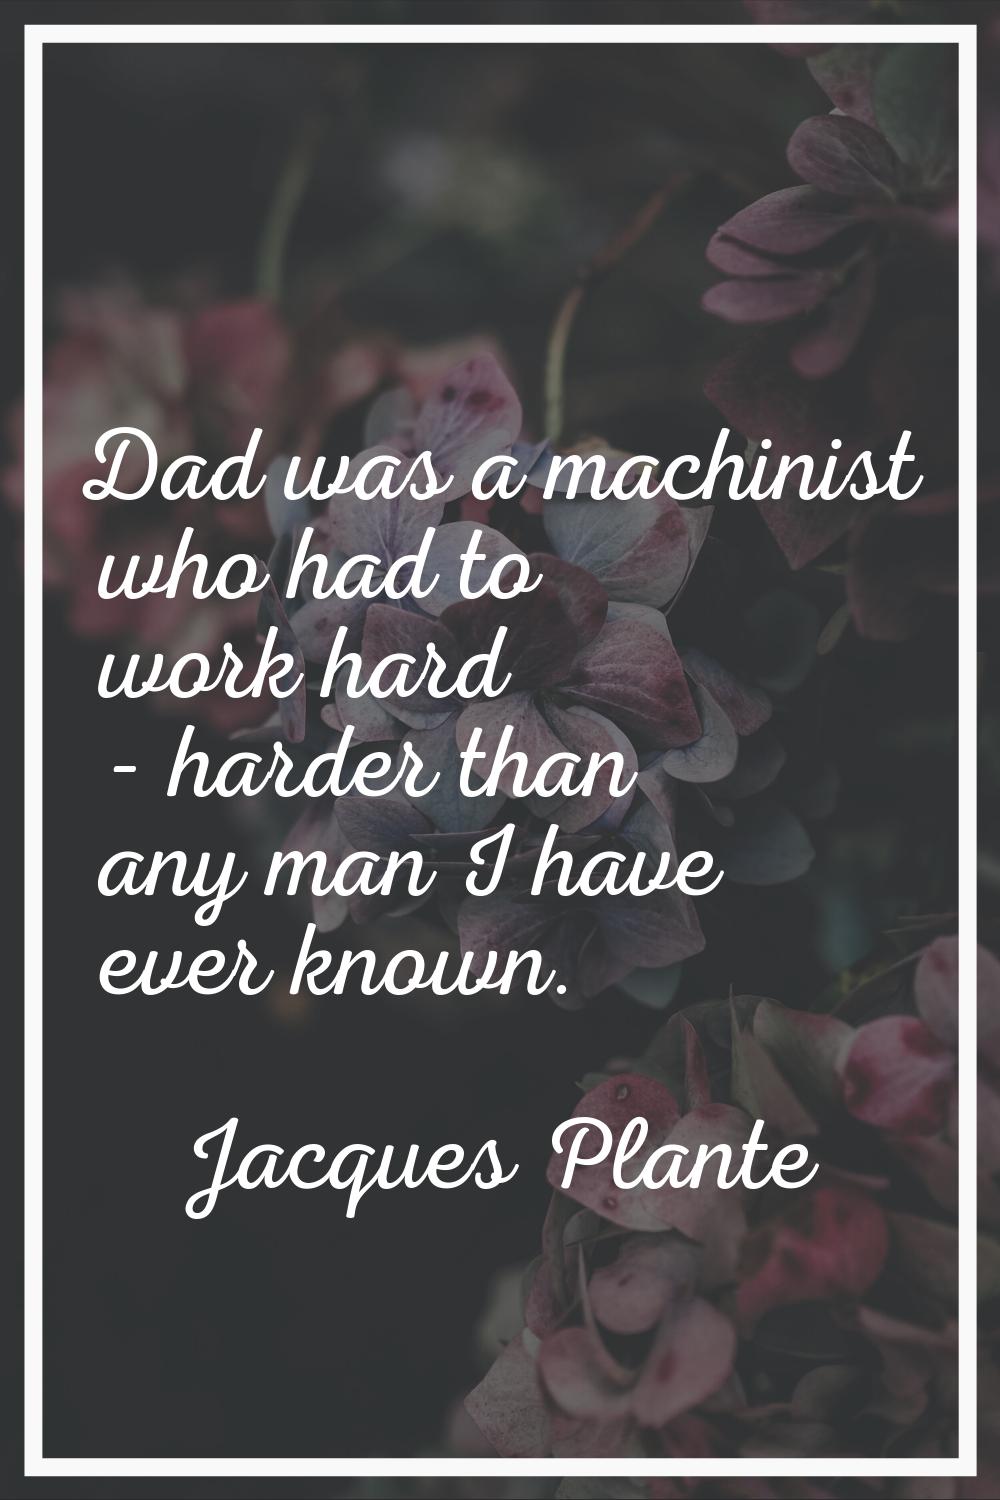 Dad was a machinist who had to work hard - harder than any man I have ever known.